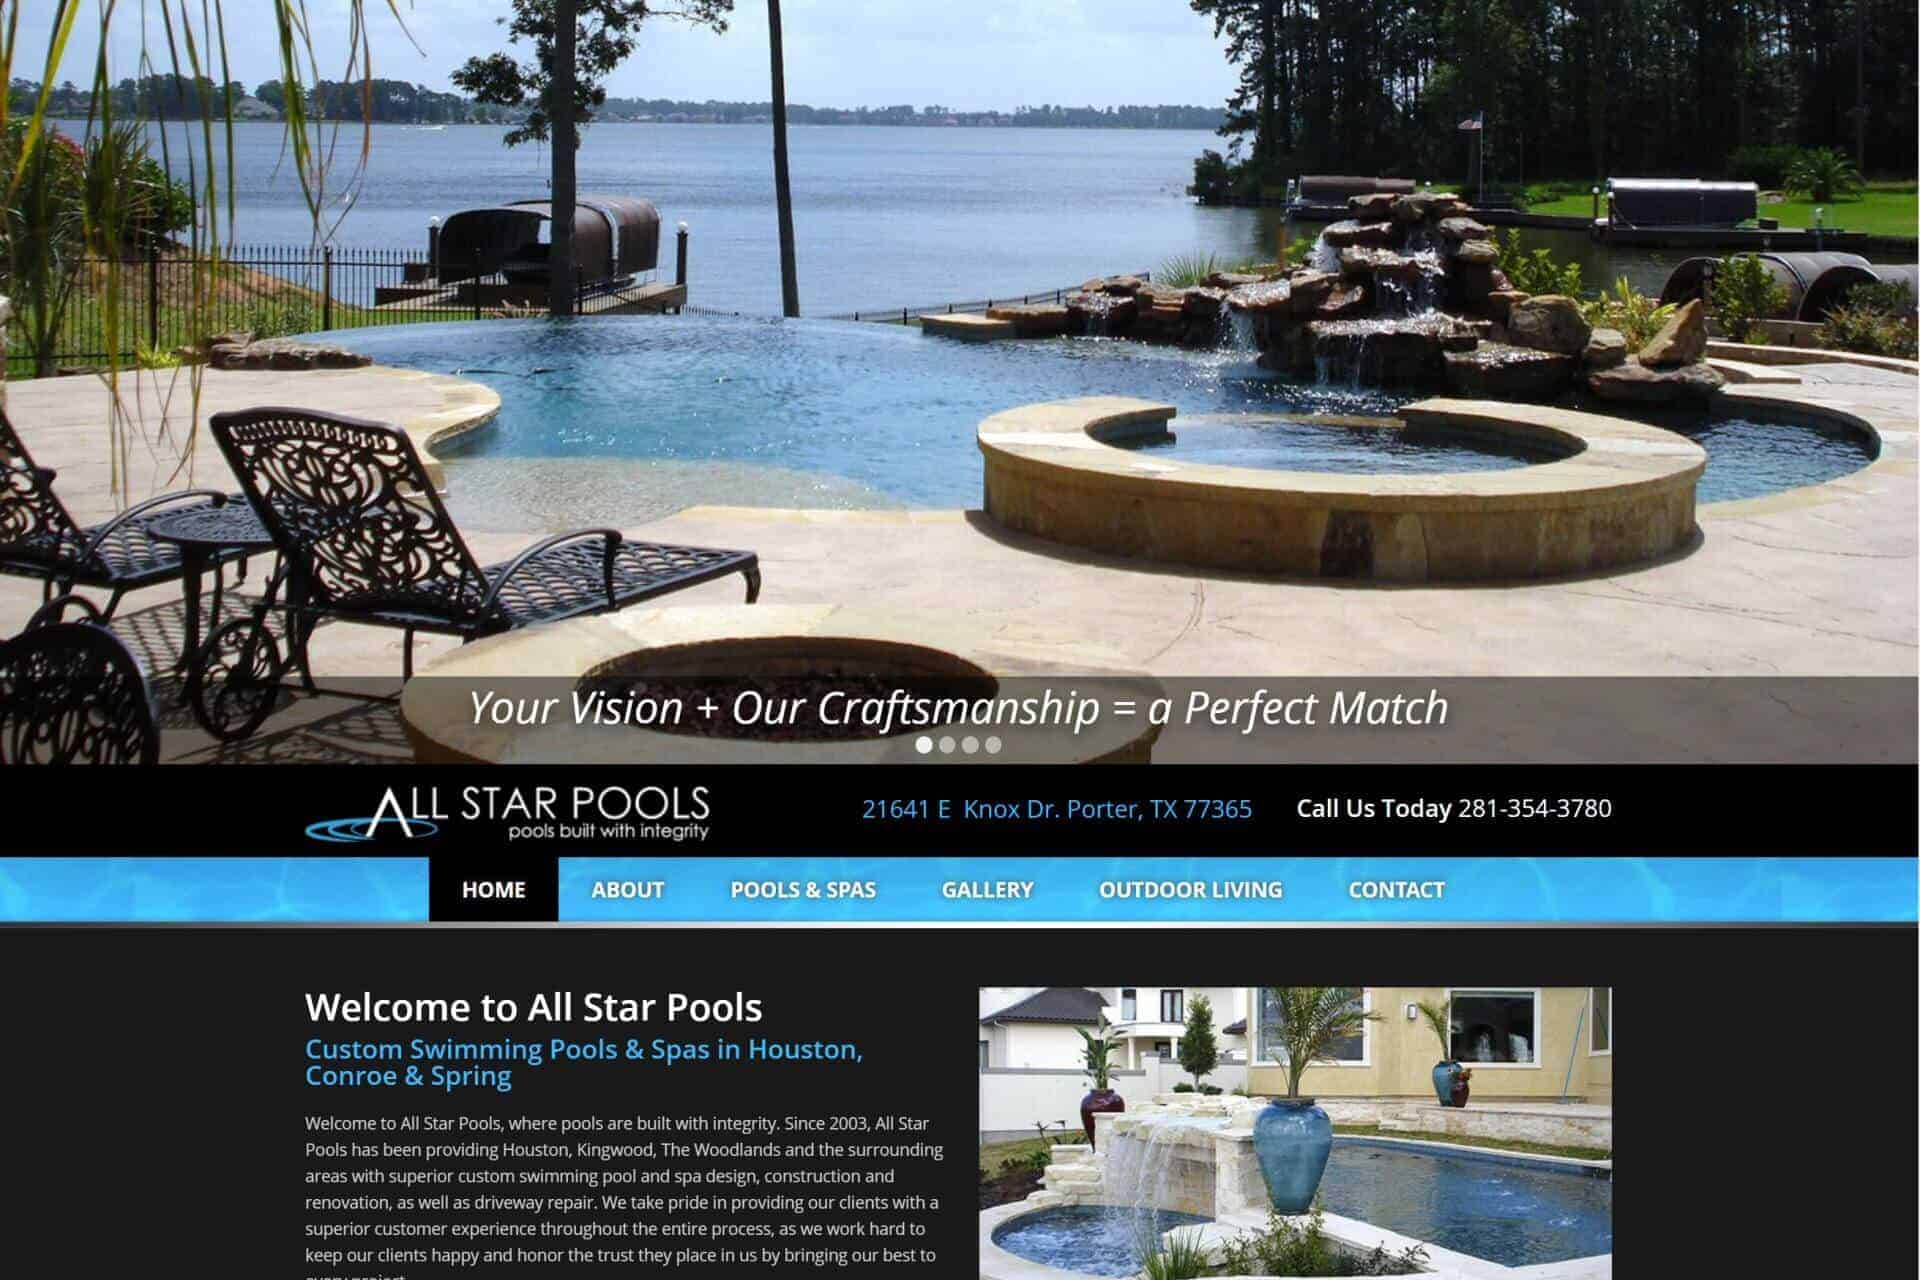 All Star Pools by Growth Services Inc.